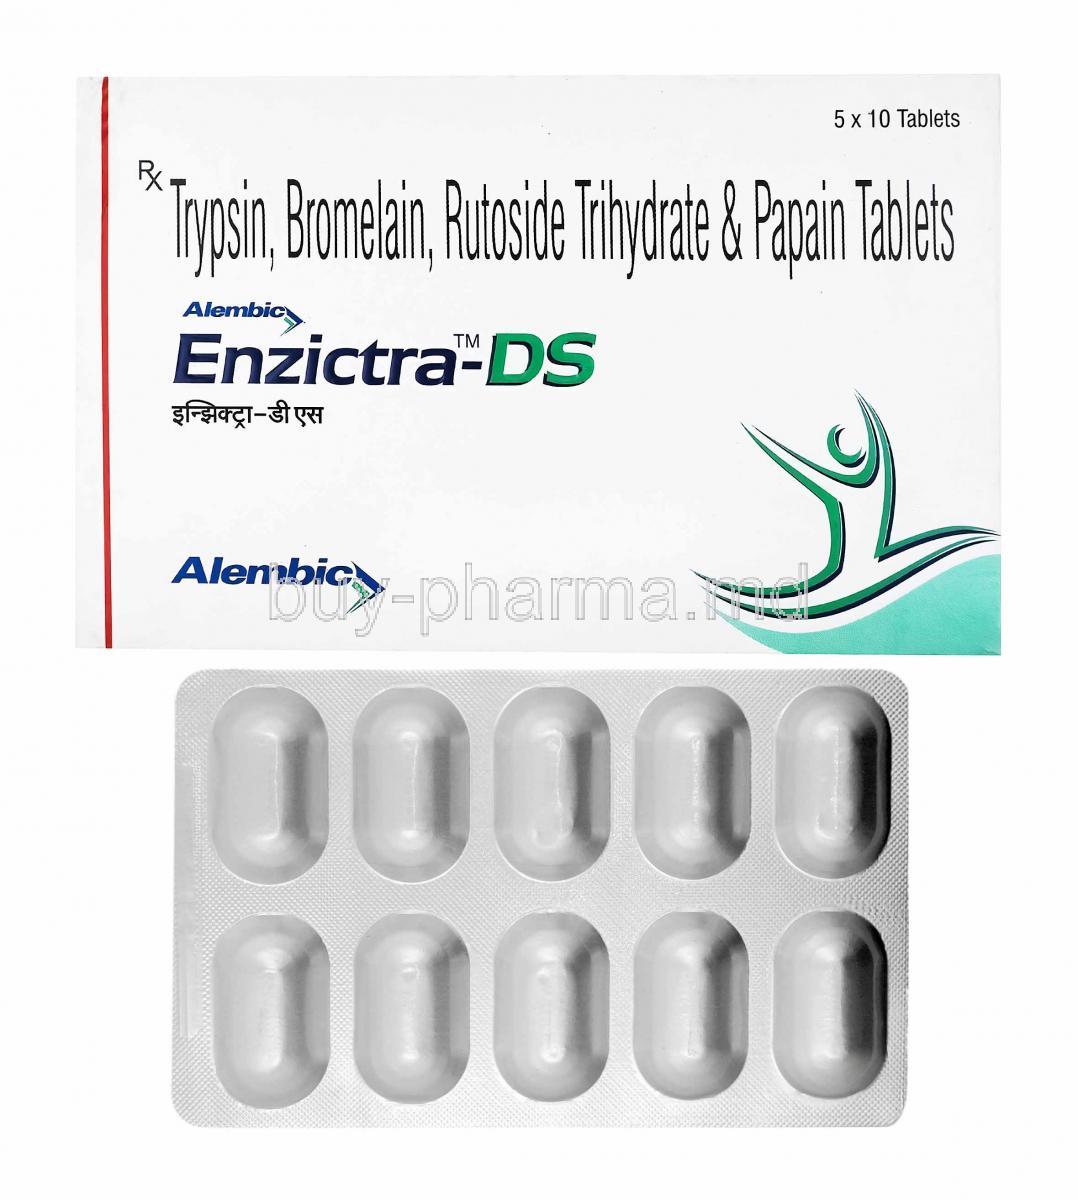 Enzictra-DS, Bromelain, Trypsin, Rutoside and Papain, box and tablets